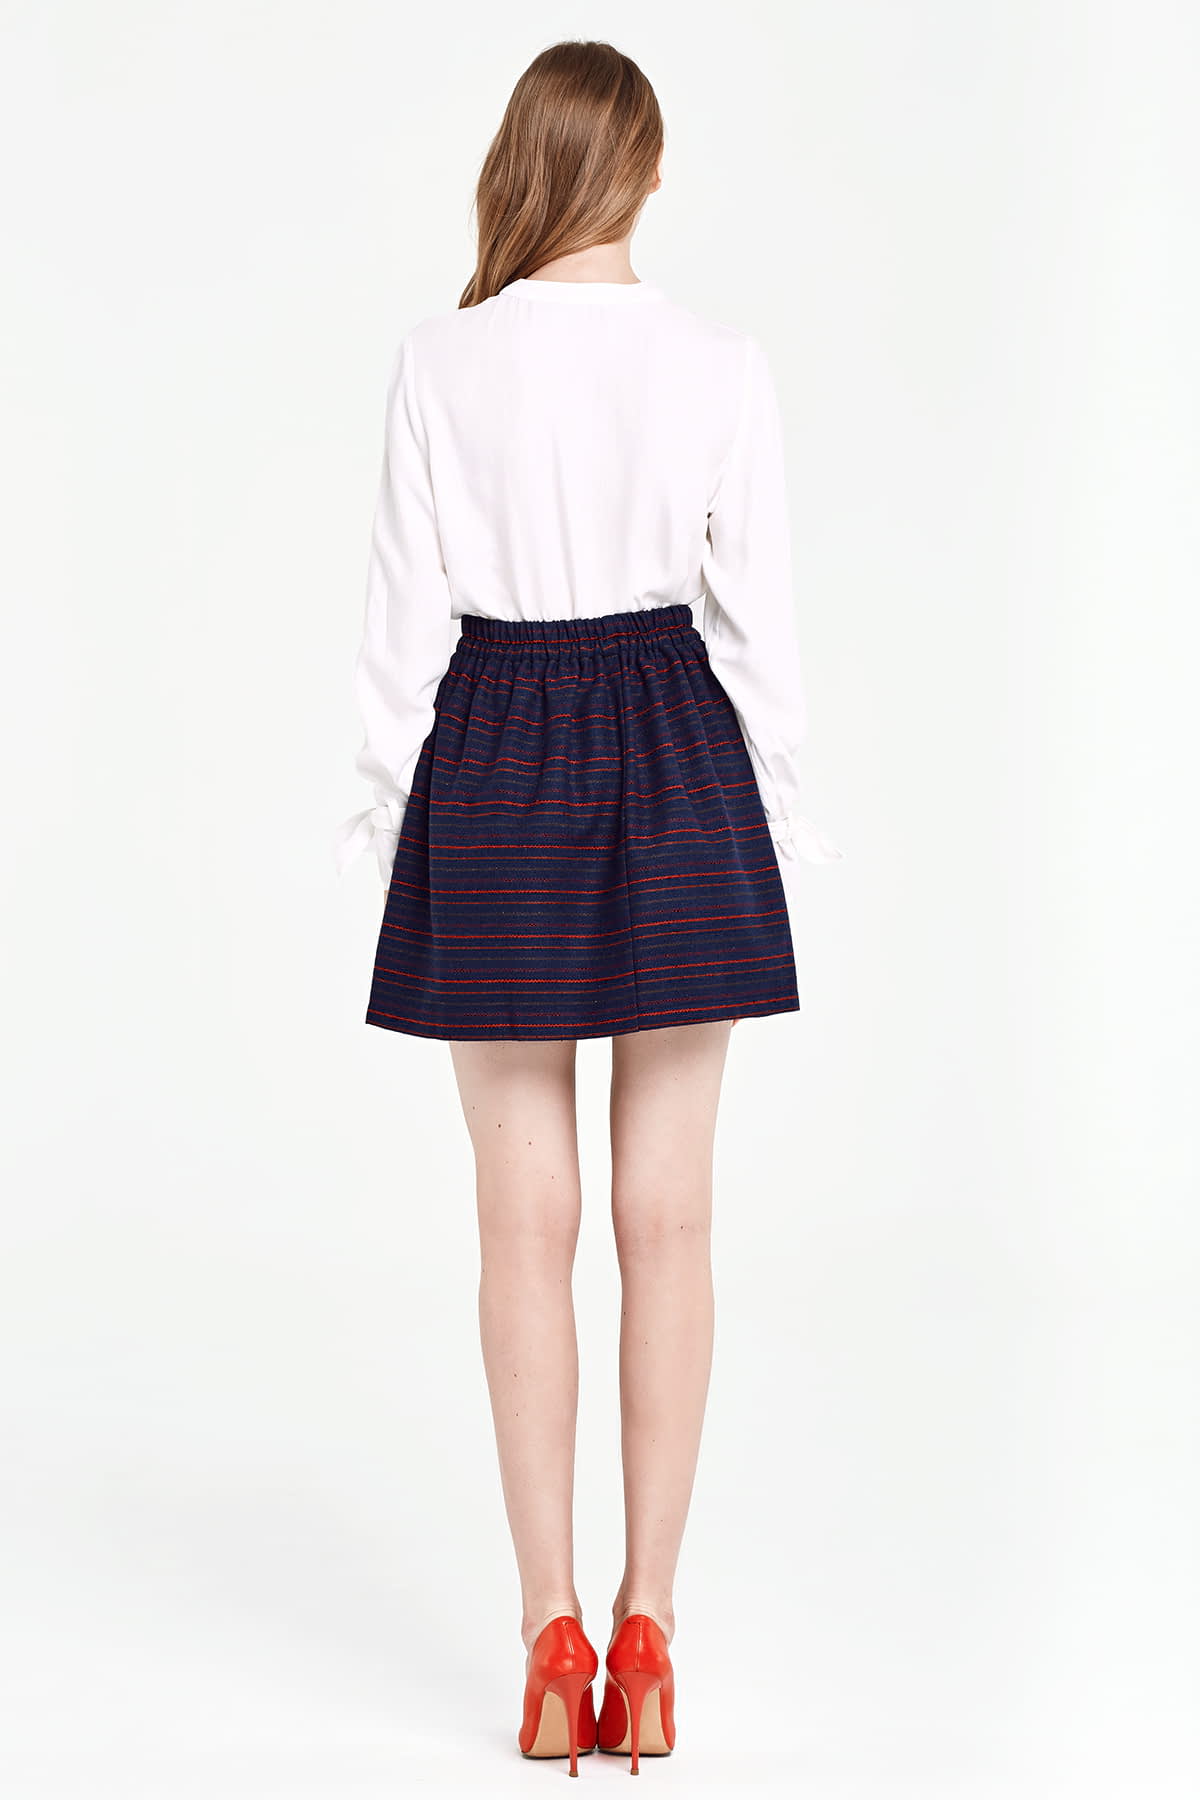 Dark blue skirt with an elastic waistband and red stripes, photo 5